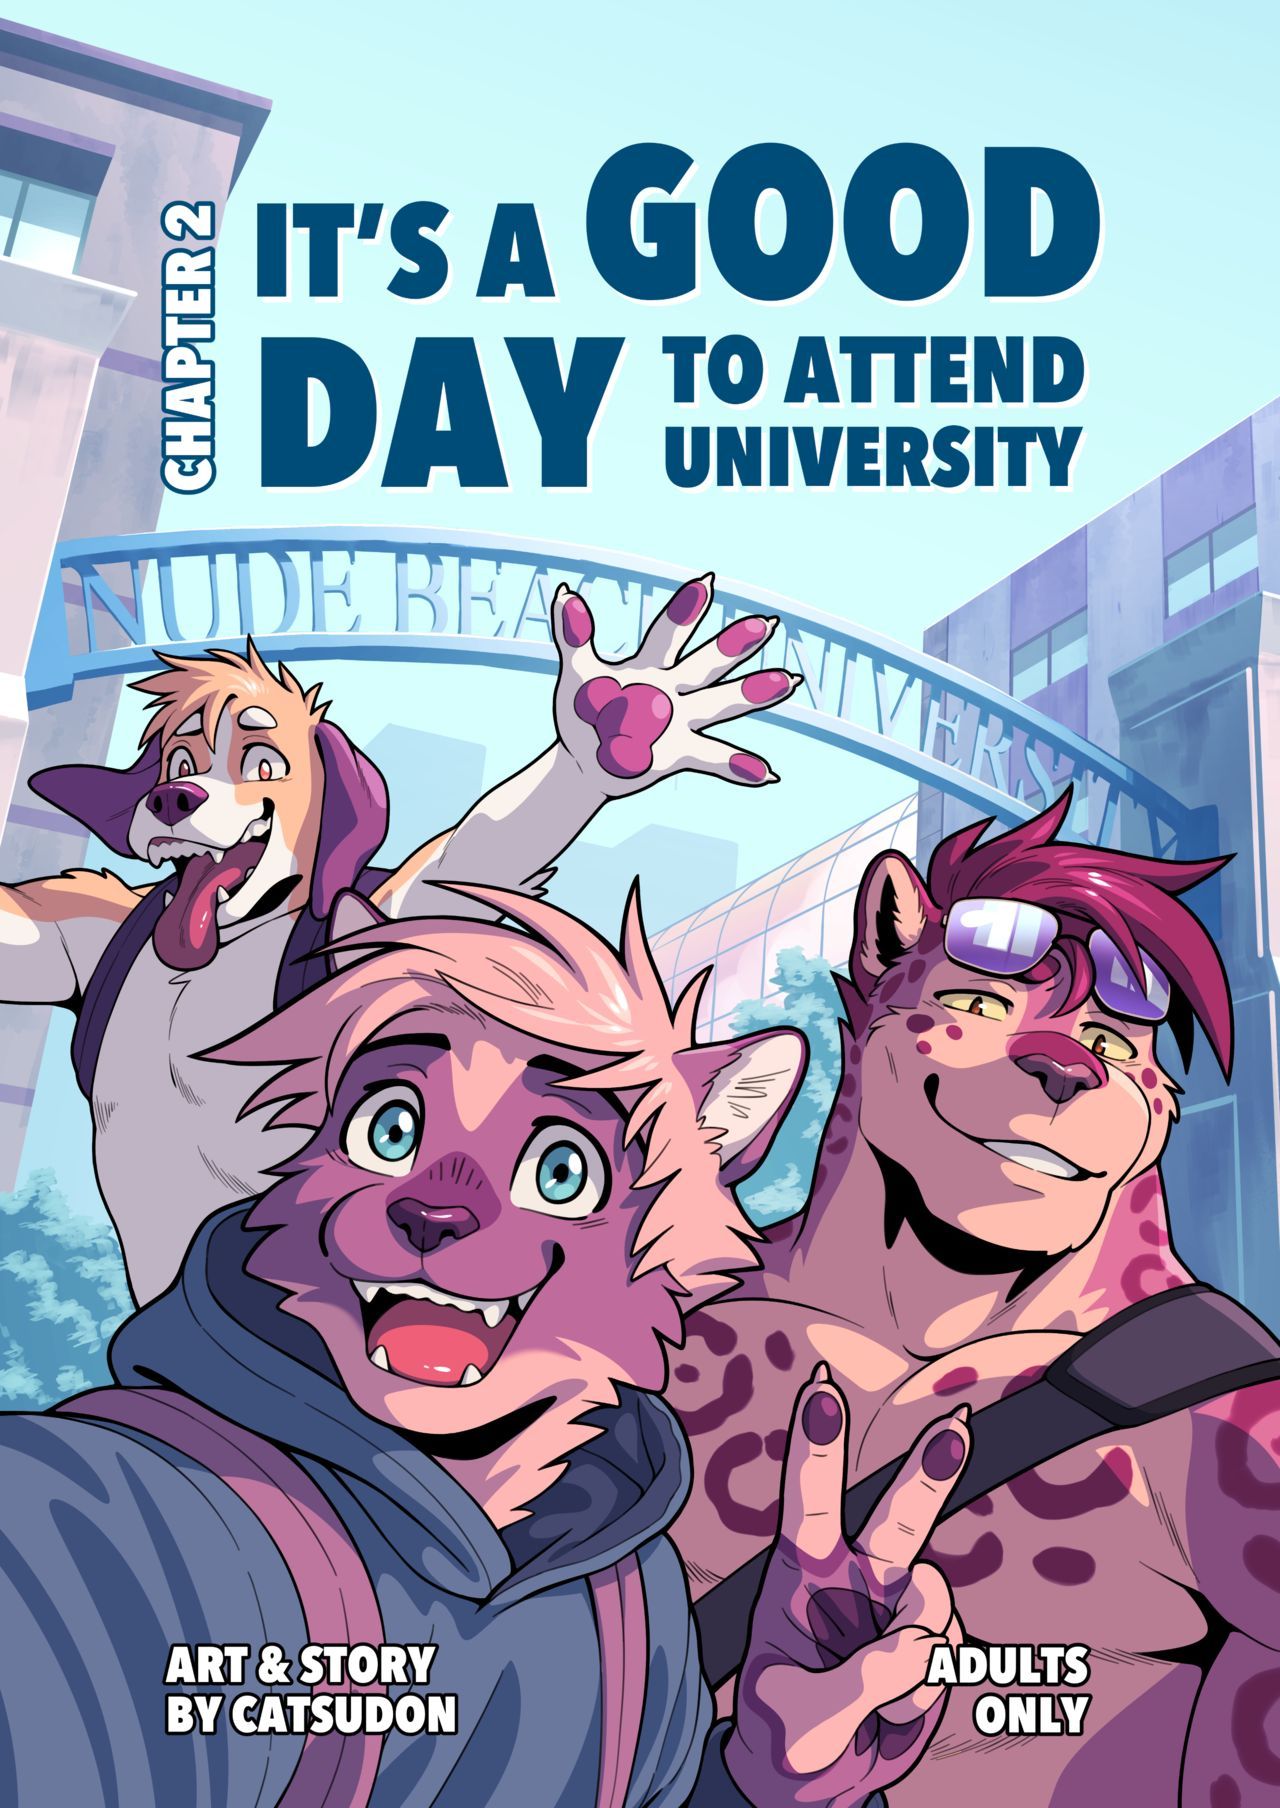 [Catsudon] It's a Good Day to Attend University [Ongoing] 1